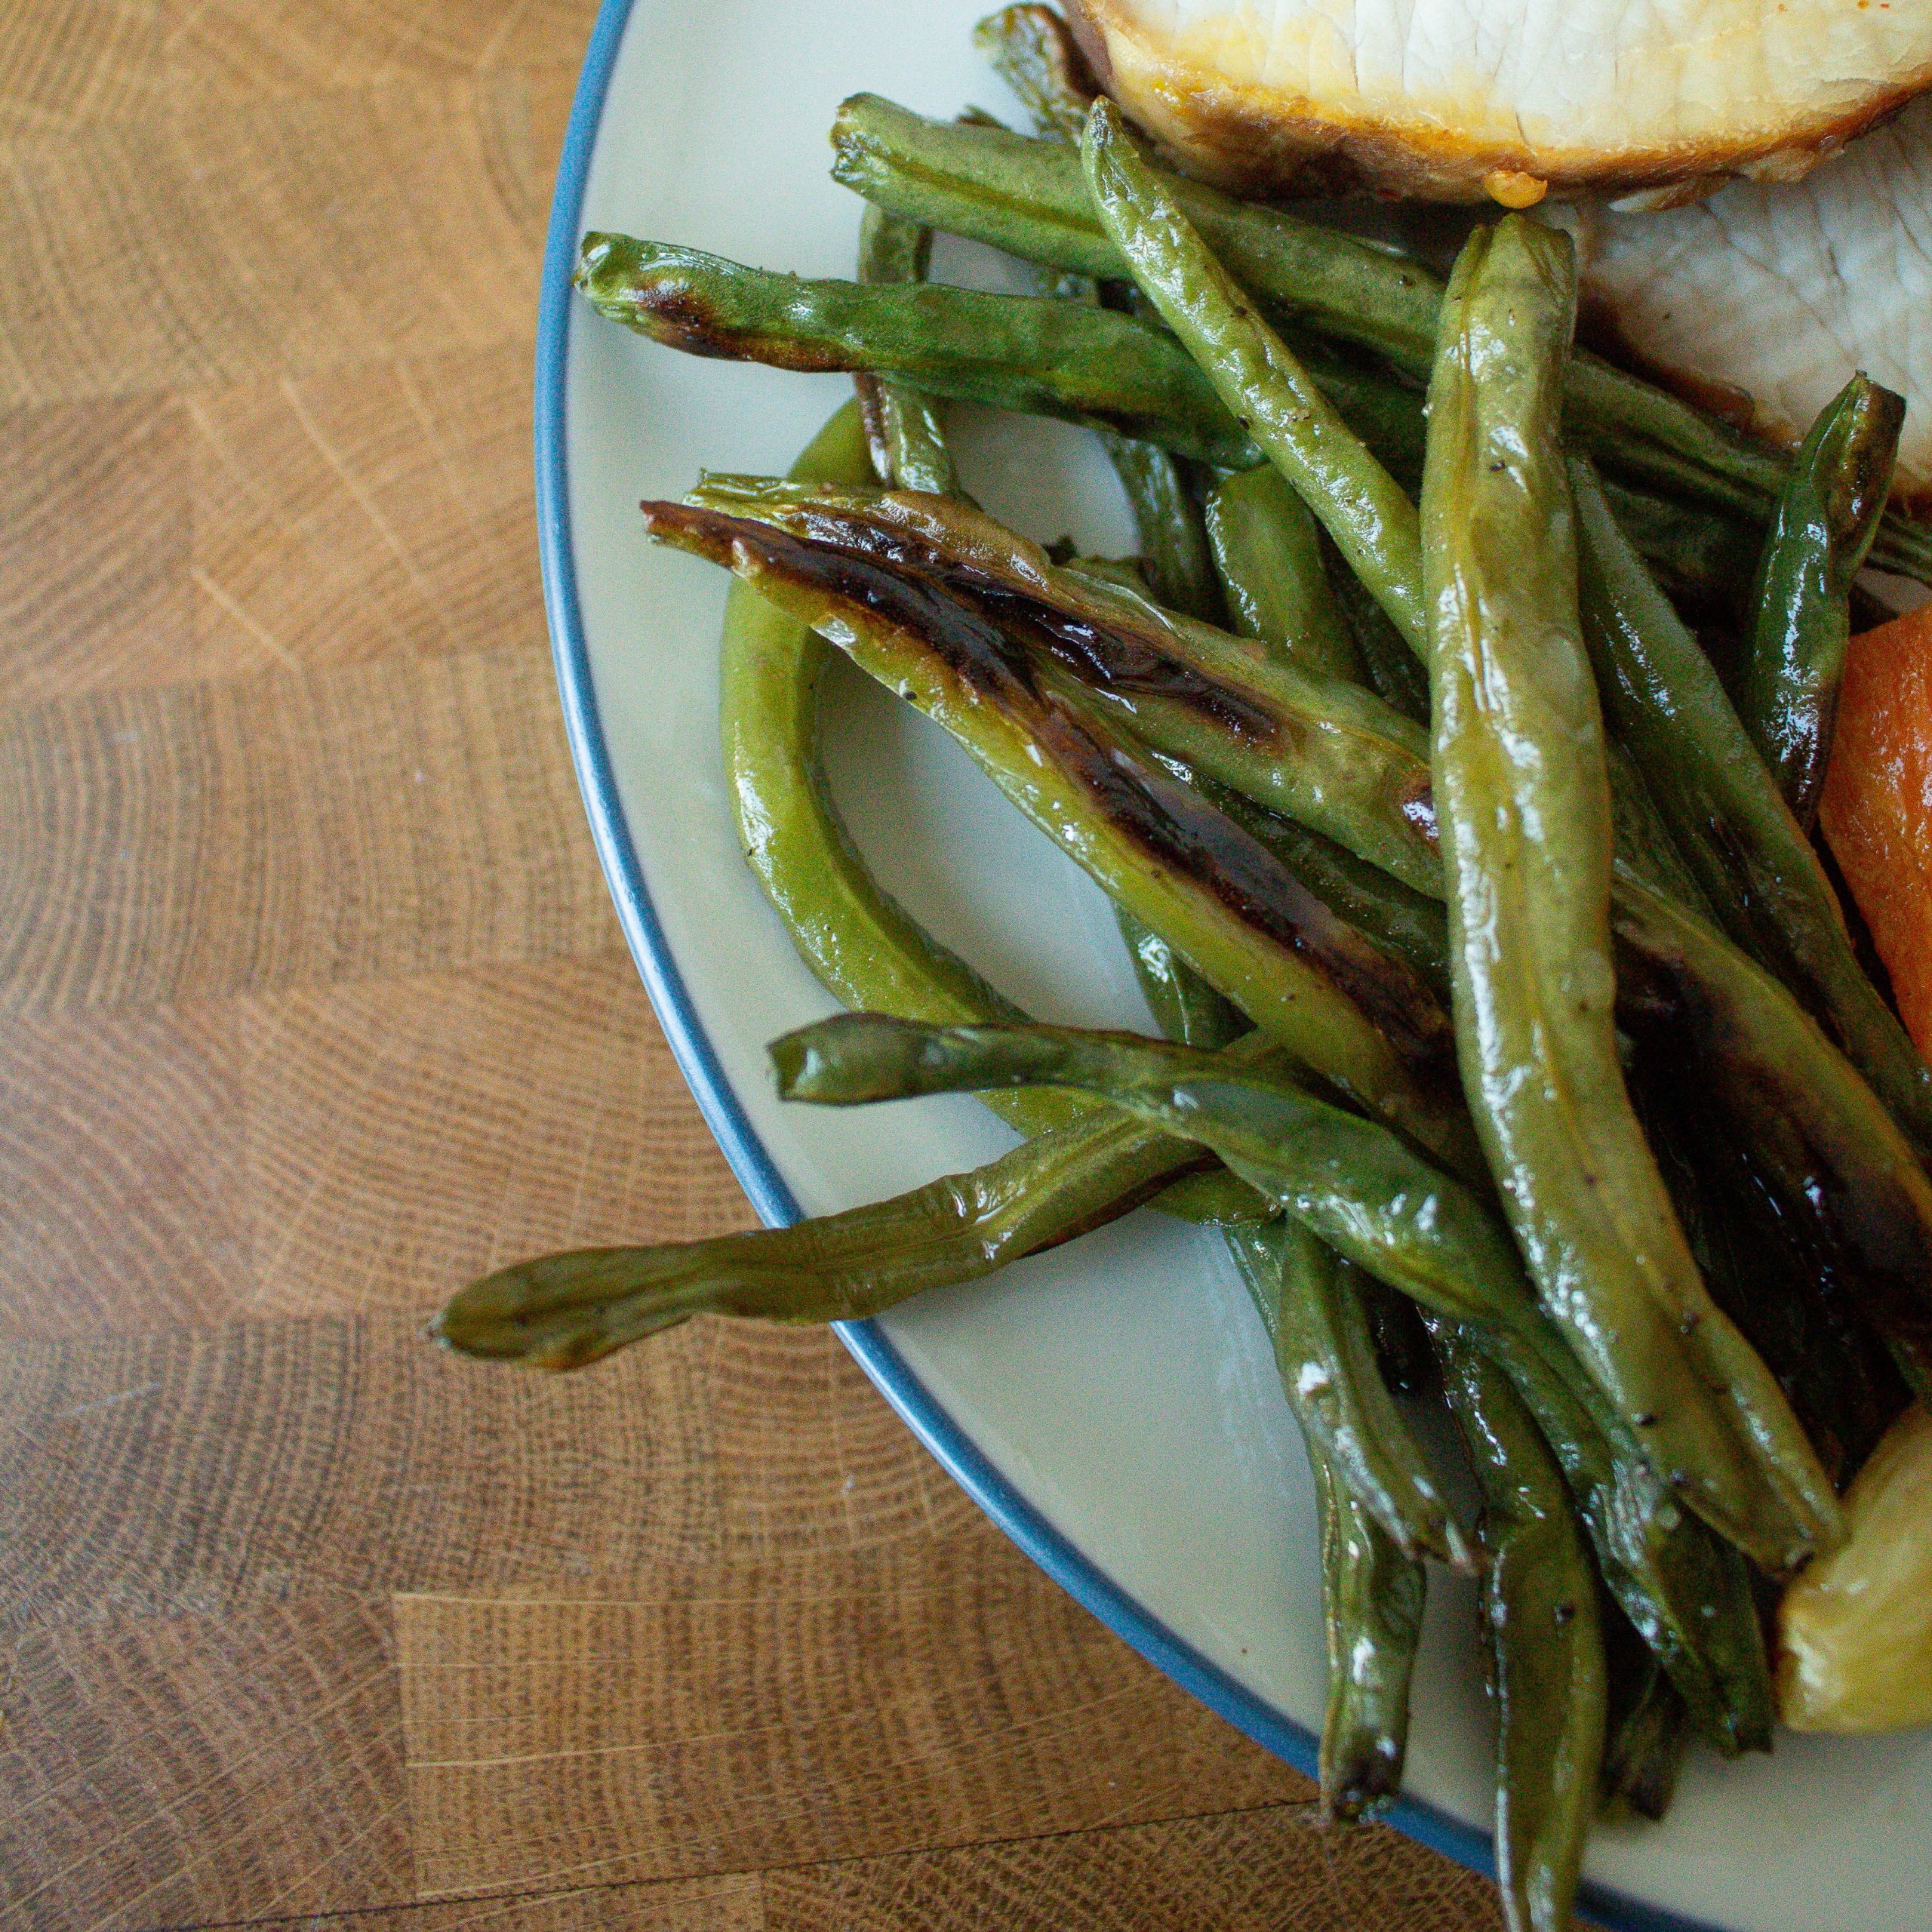 Lemon garlic green beans are an easy side dish equally suited to a weeknight dinner or your Easter table!